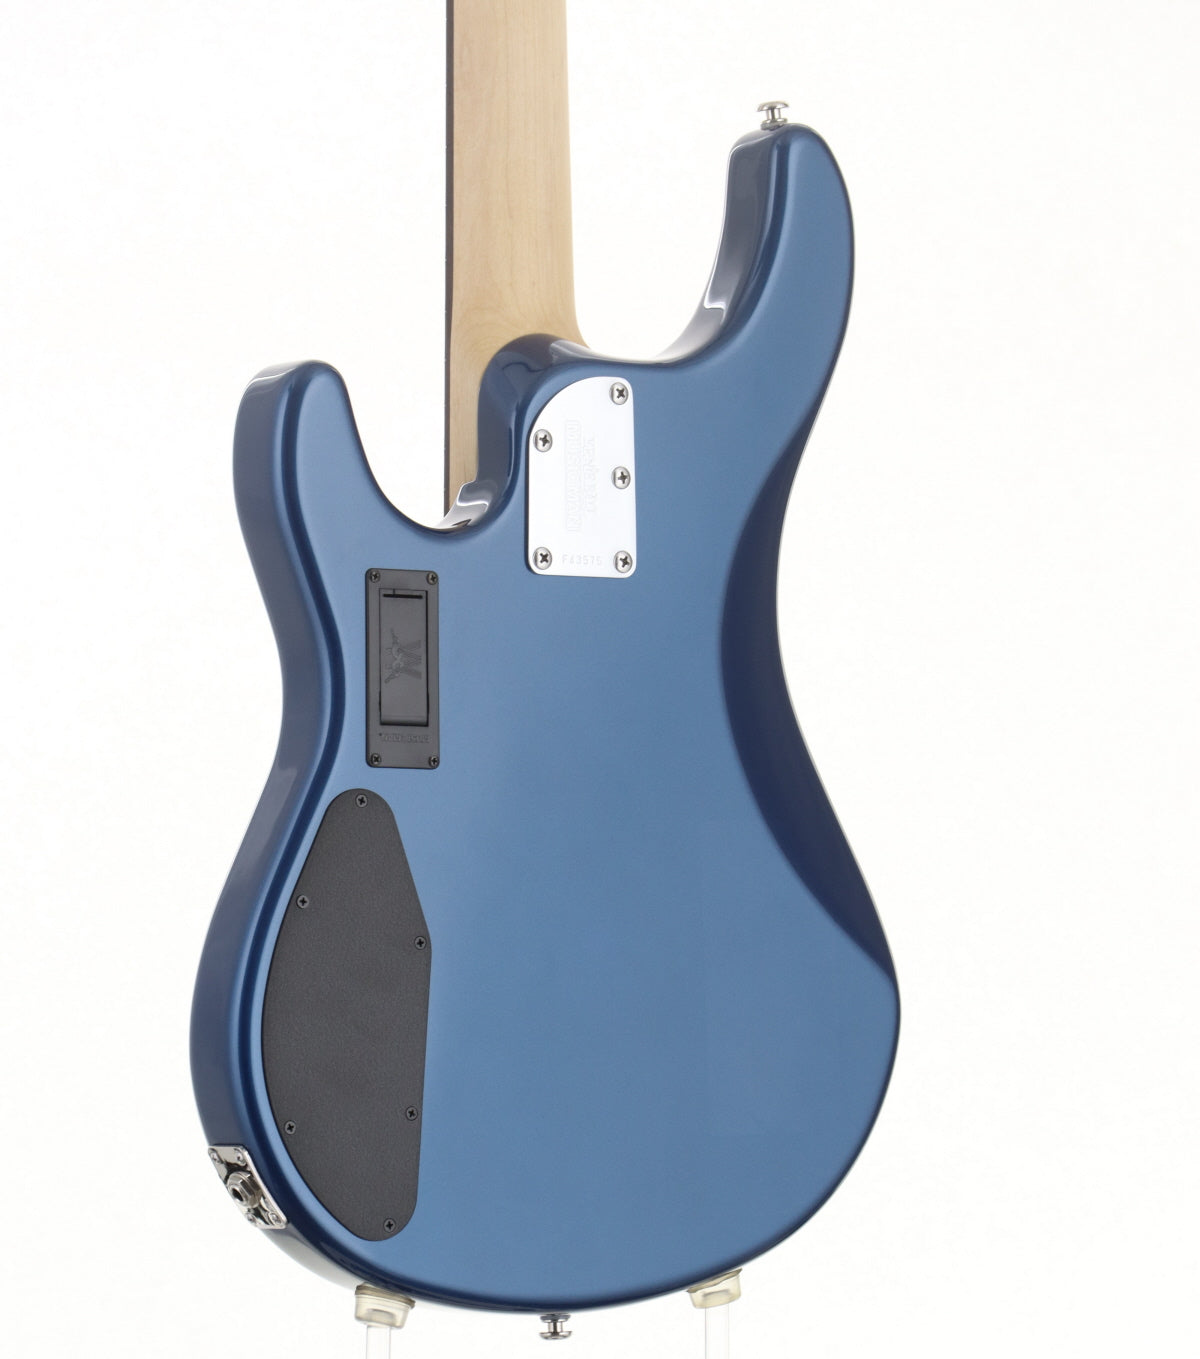 [SN F43575] USED Musicman / Sterling 4 H Blue Pearl [10]